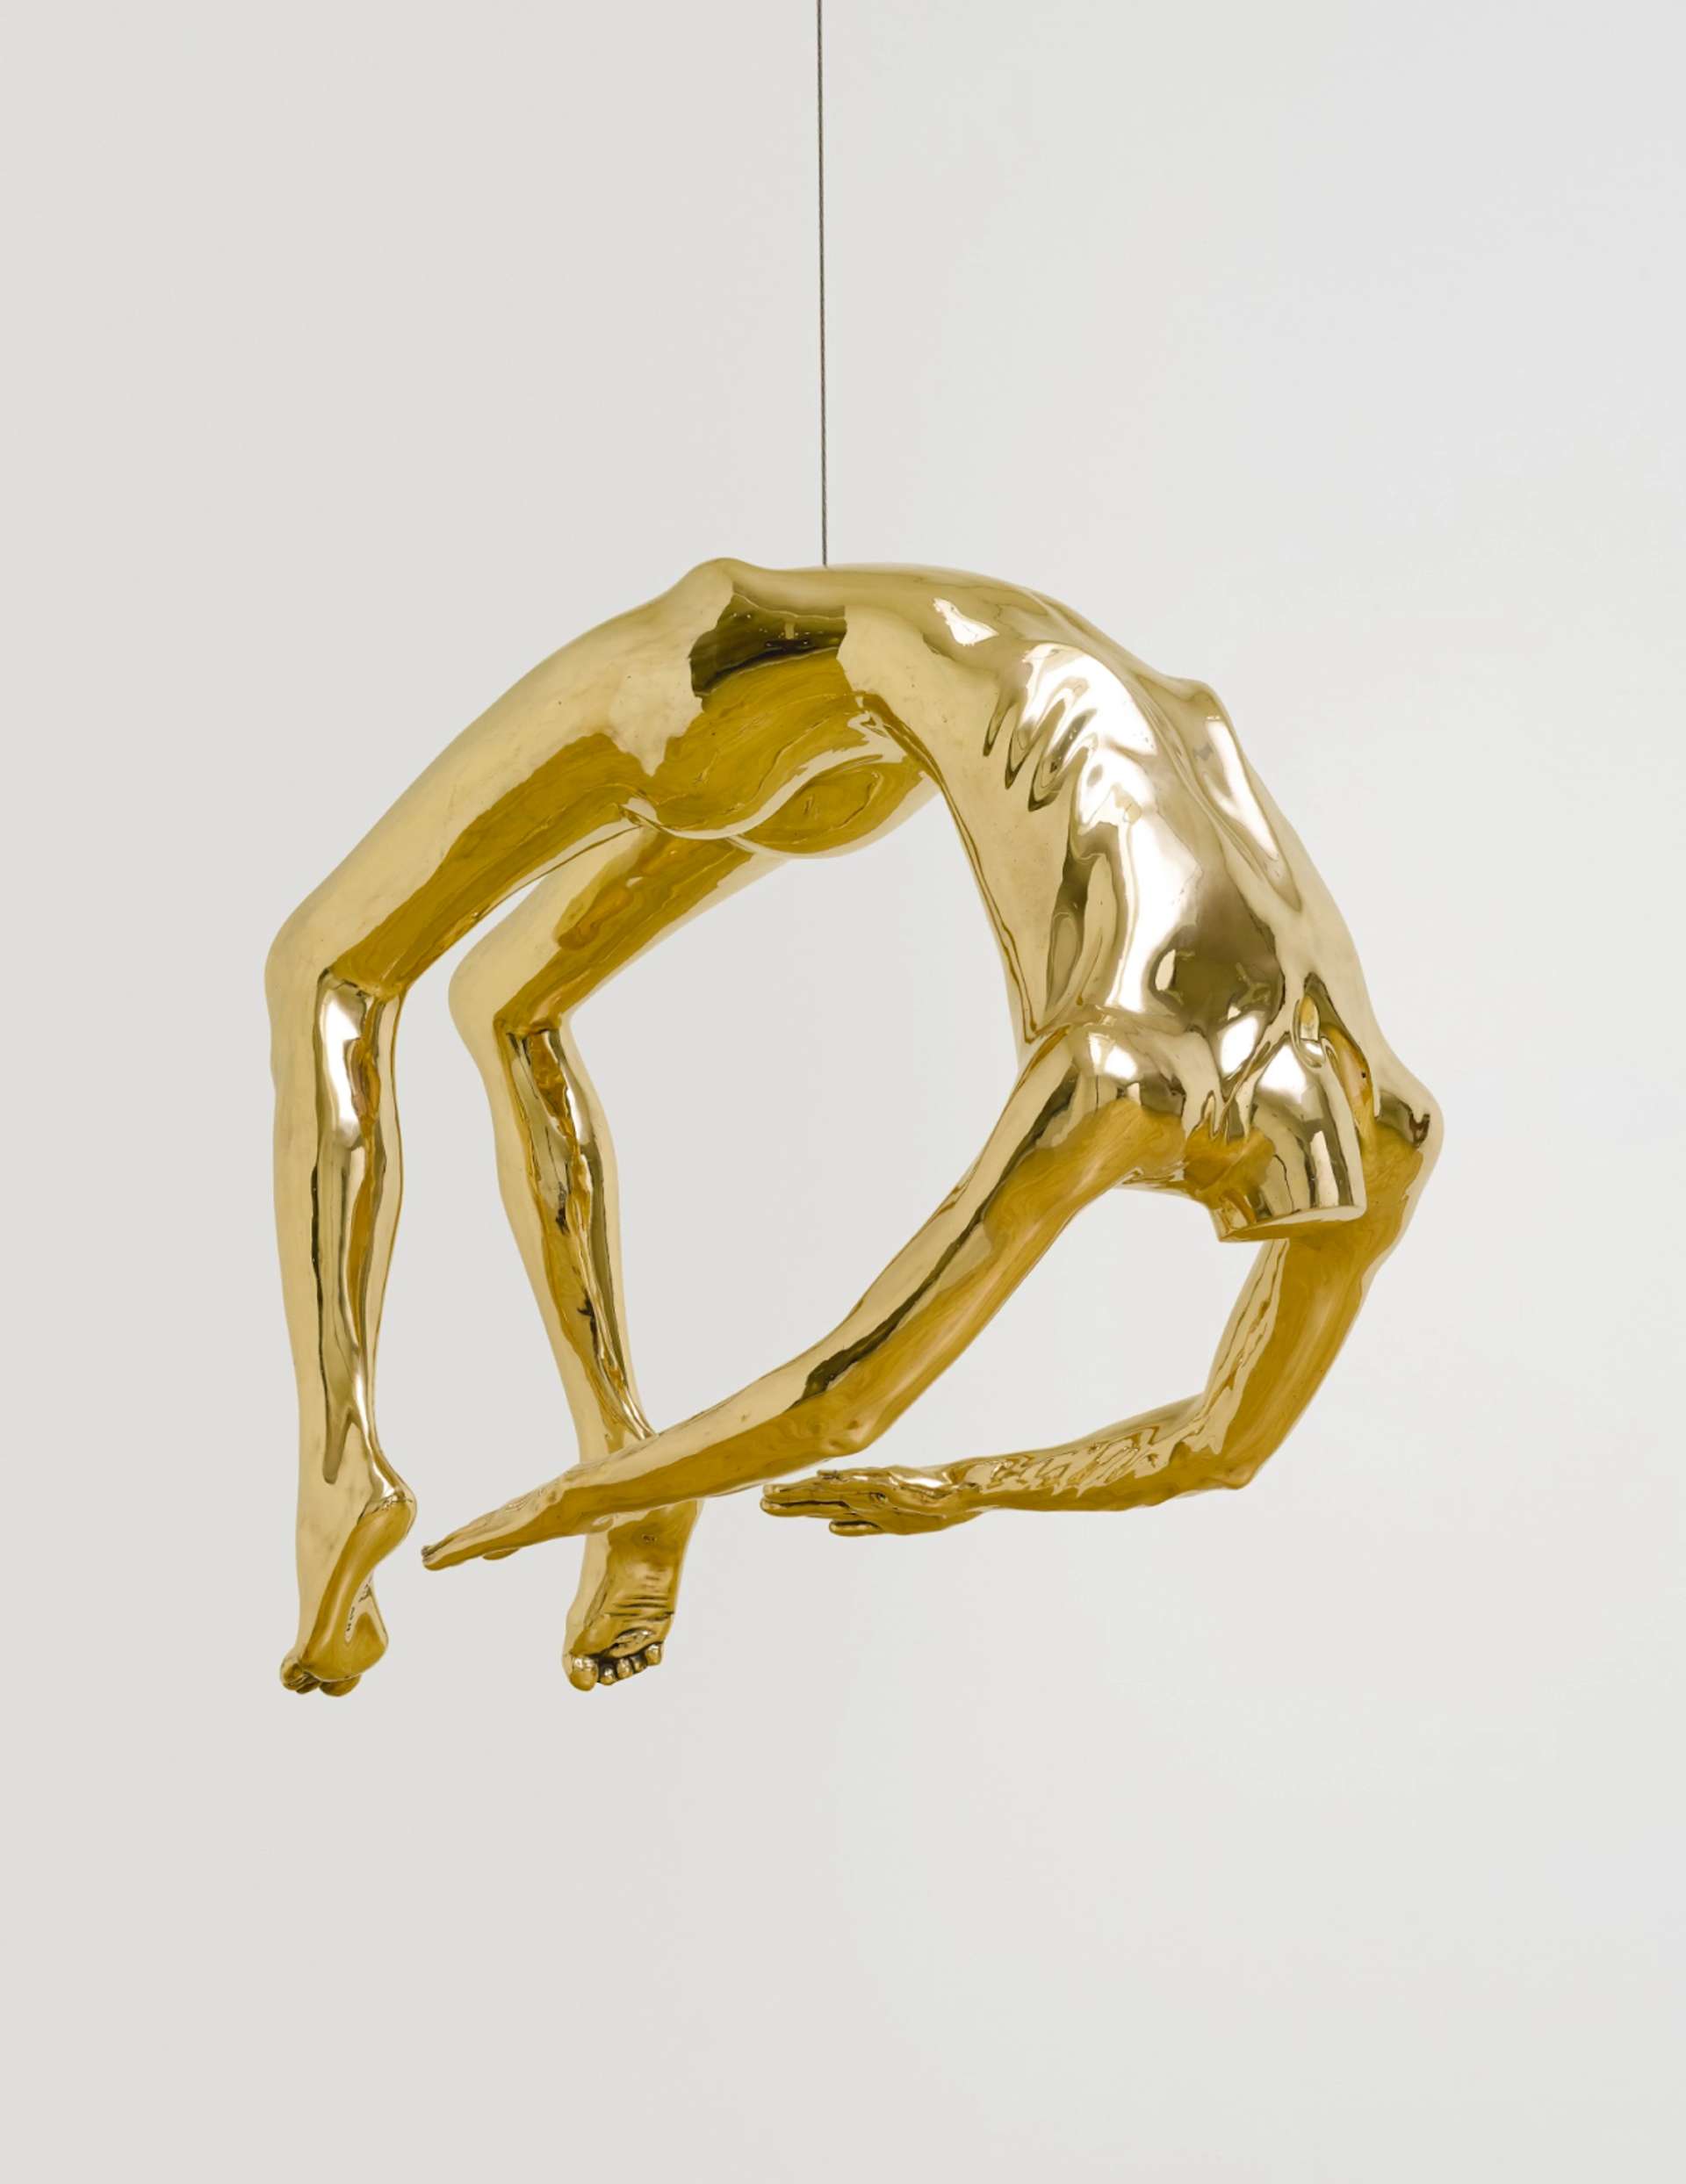 A polished bronze sculpture suspended from a barely visible string, depicting a headless body in an exaggerated arched pose. Its arms are extended and reaching towards its feet, creating a geometric circle shape.